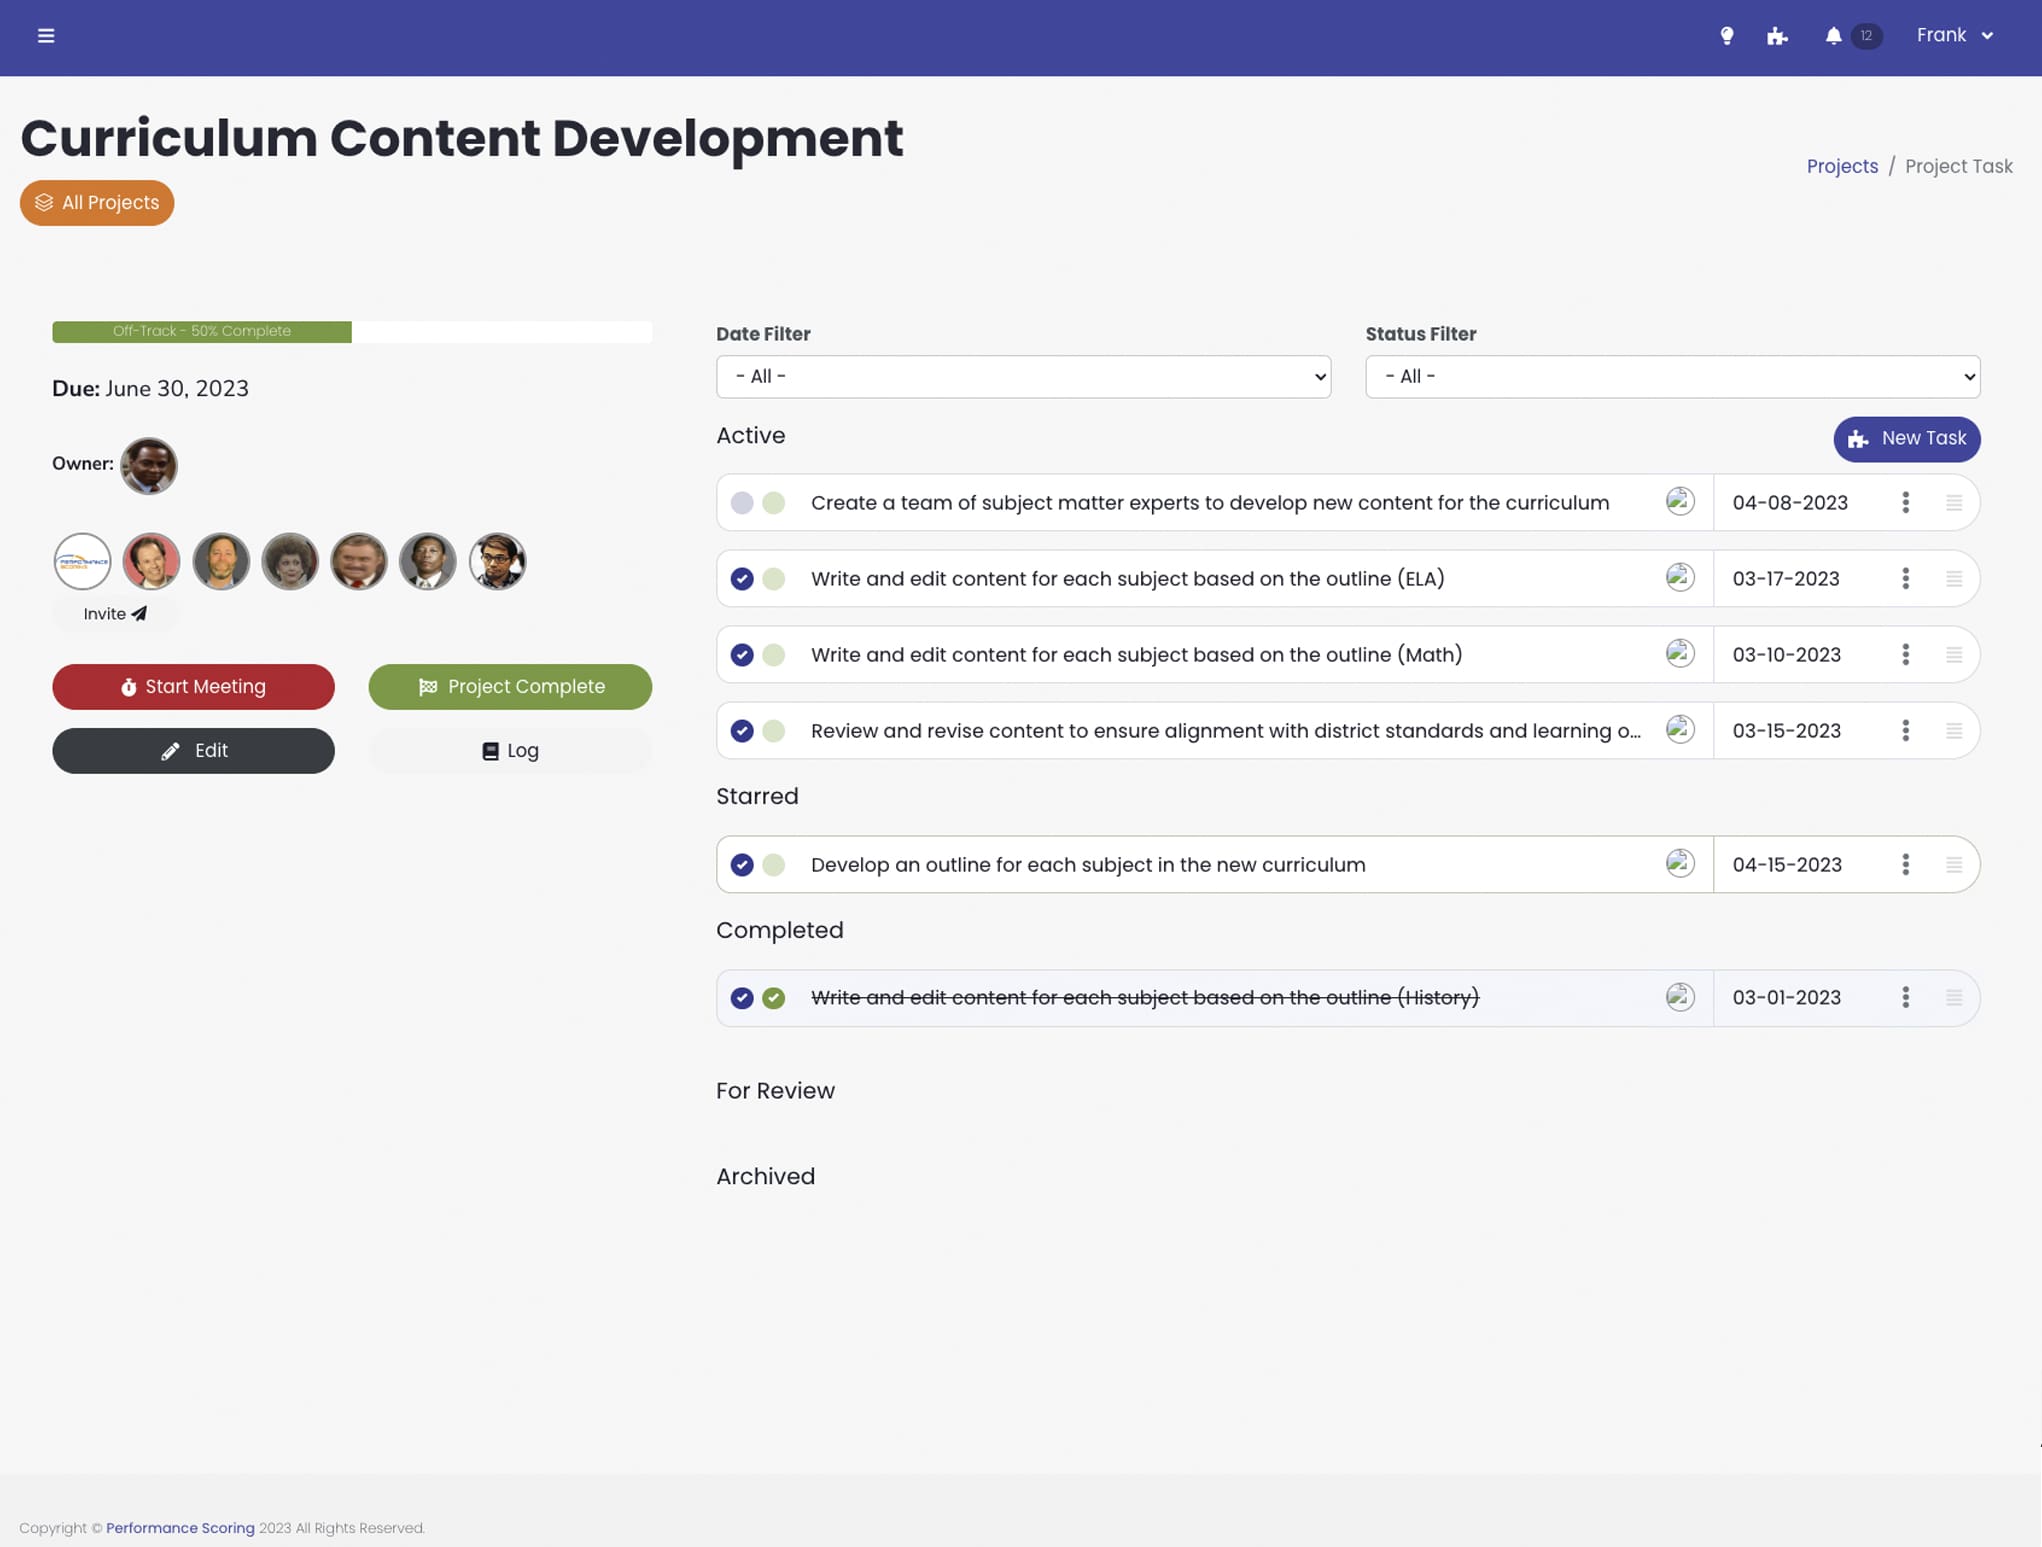 With LoopSpire meeting management & engagement tool you can create and manage project workflows, assign tasks, and track progress towards goals.